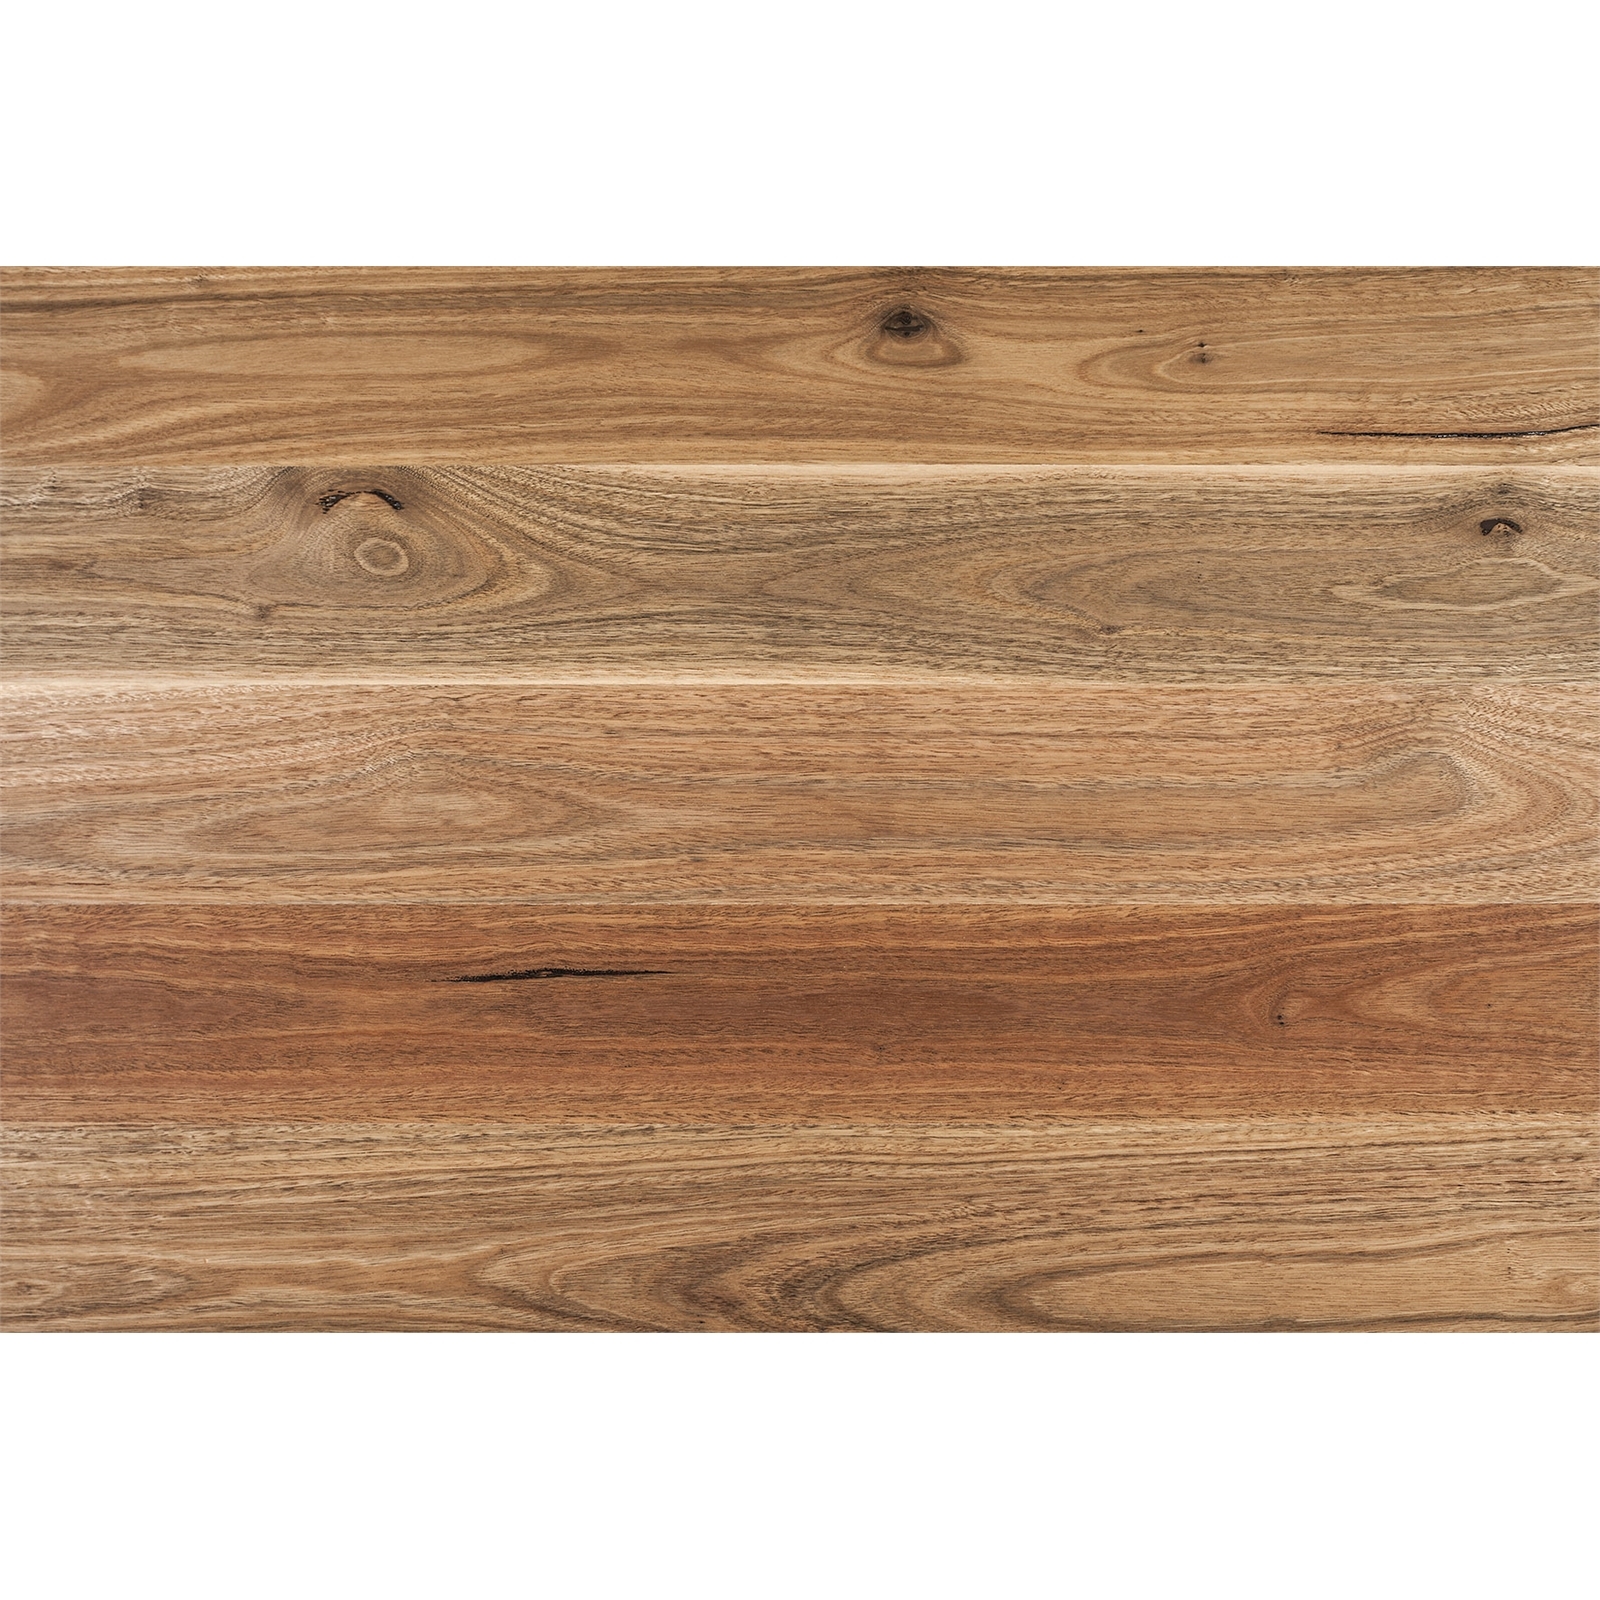 134mm Flooring Spotted Gum 112.65SQM Pack